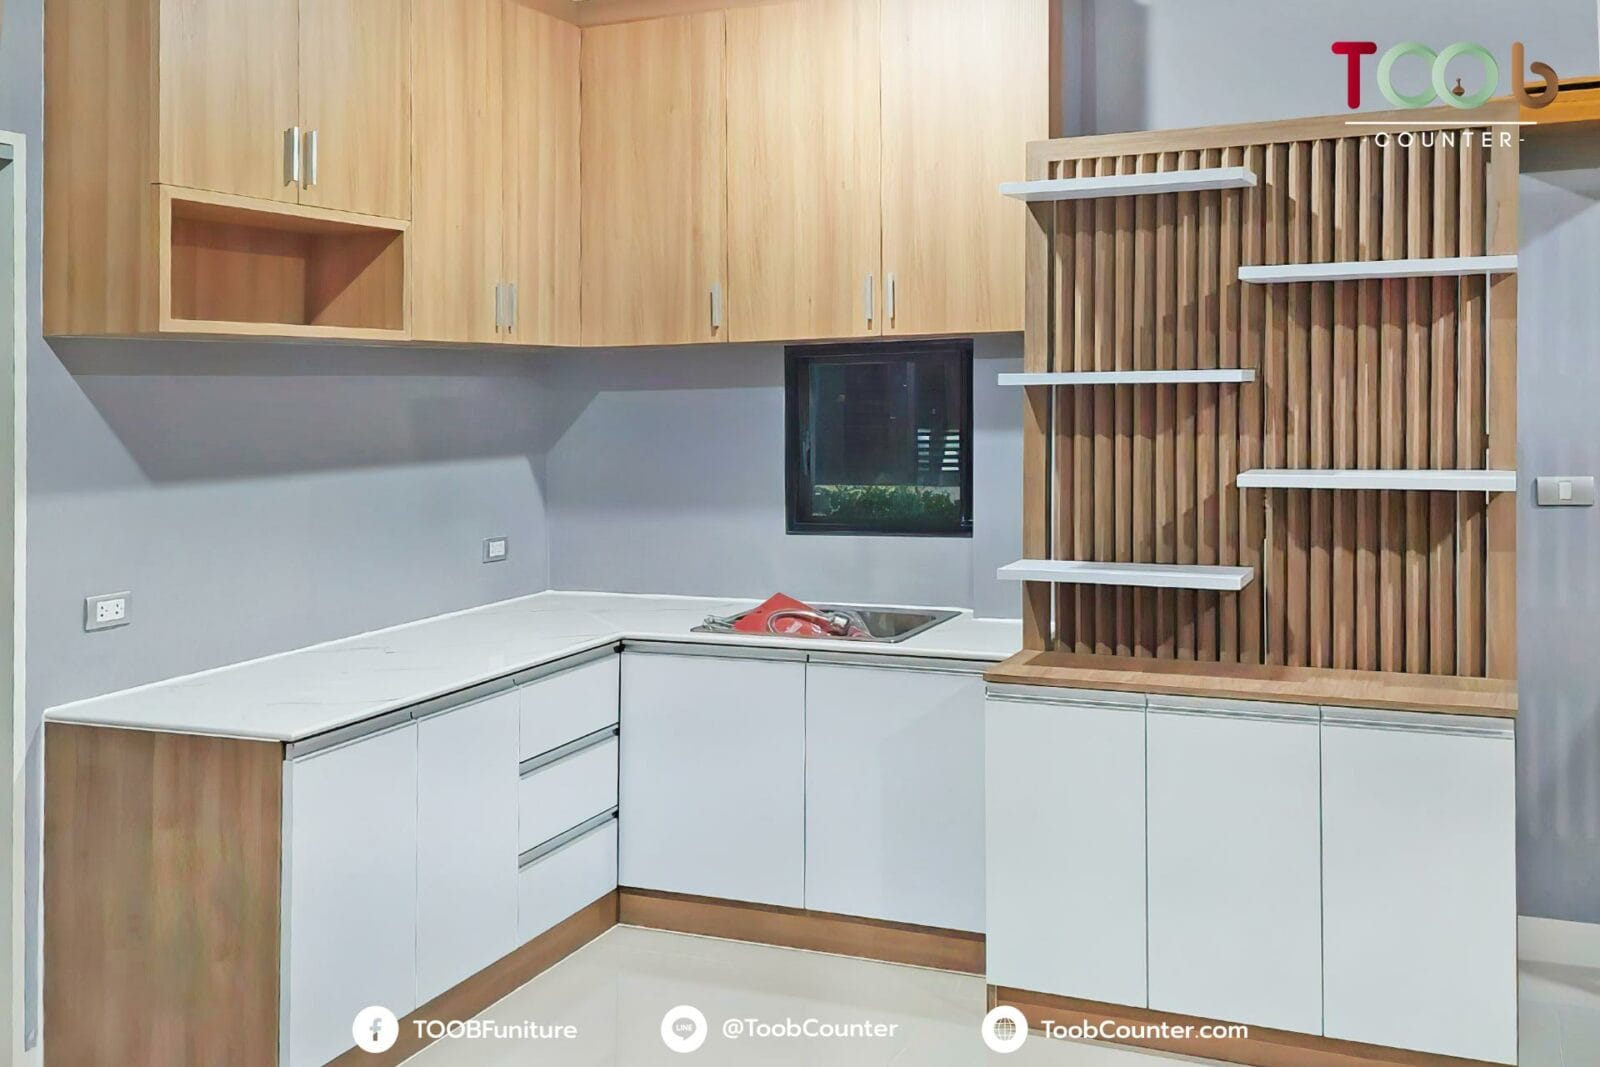 4. Minimal kitchen counter made to order by toob